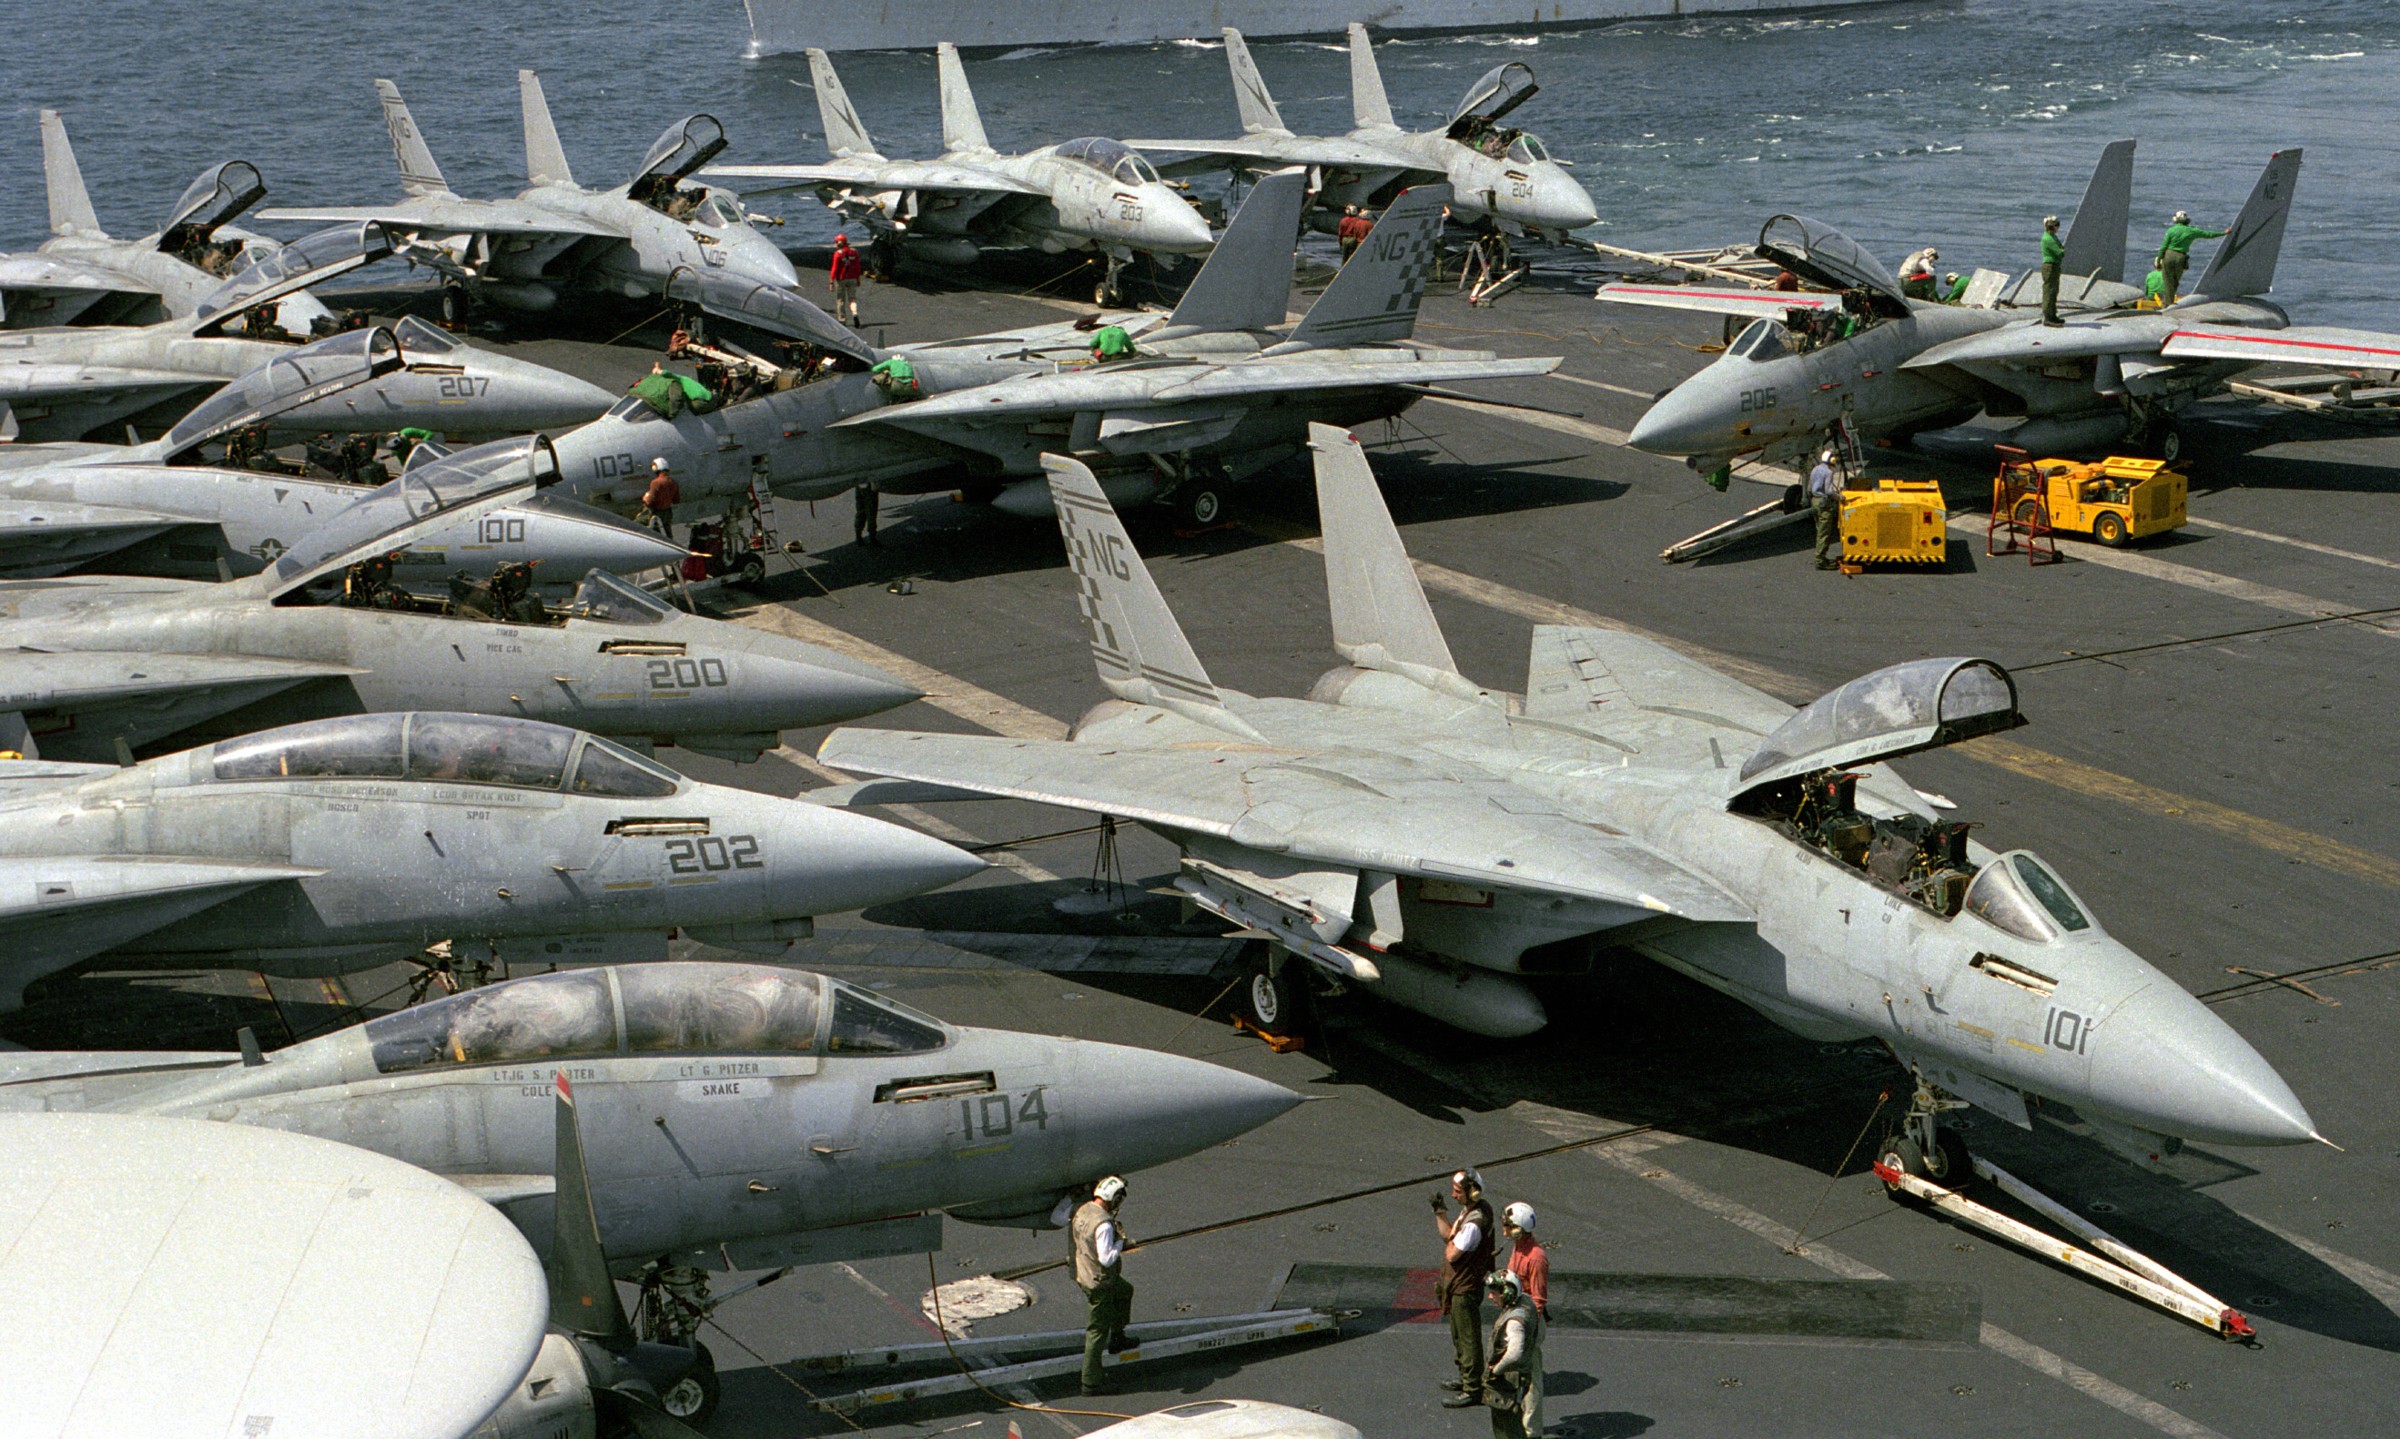 vf-211 fighting checkmates fighter squadron f-14a tomcat us navy carrier air wing cvw-9 uss nimitz cvn-68 72